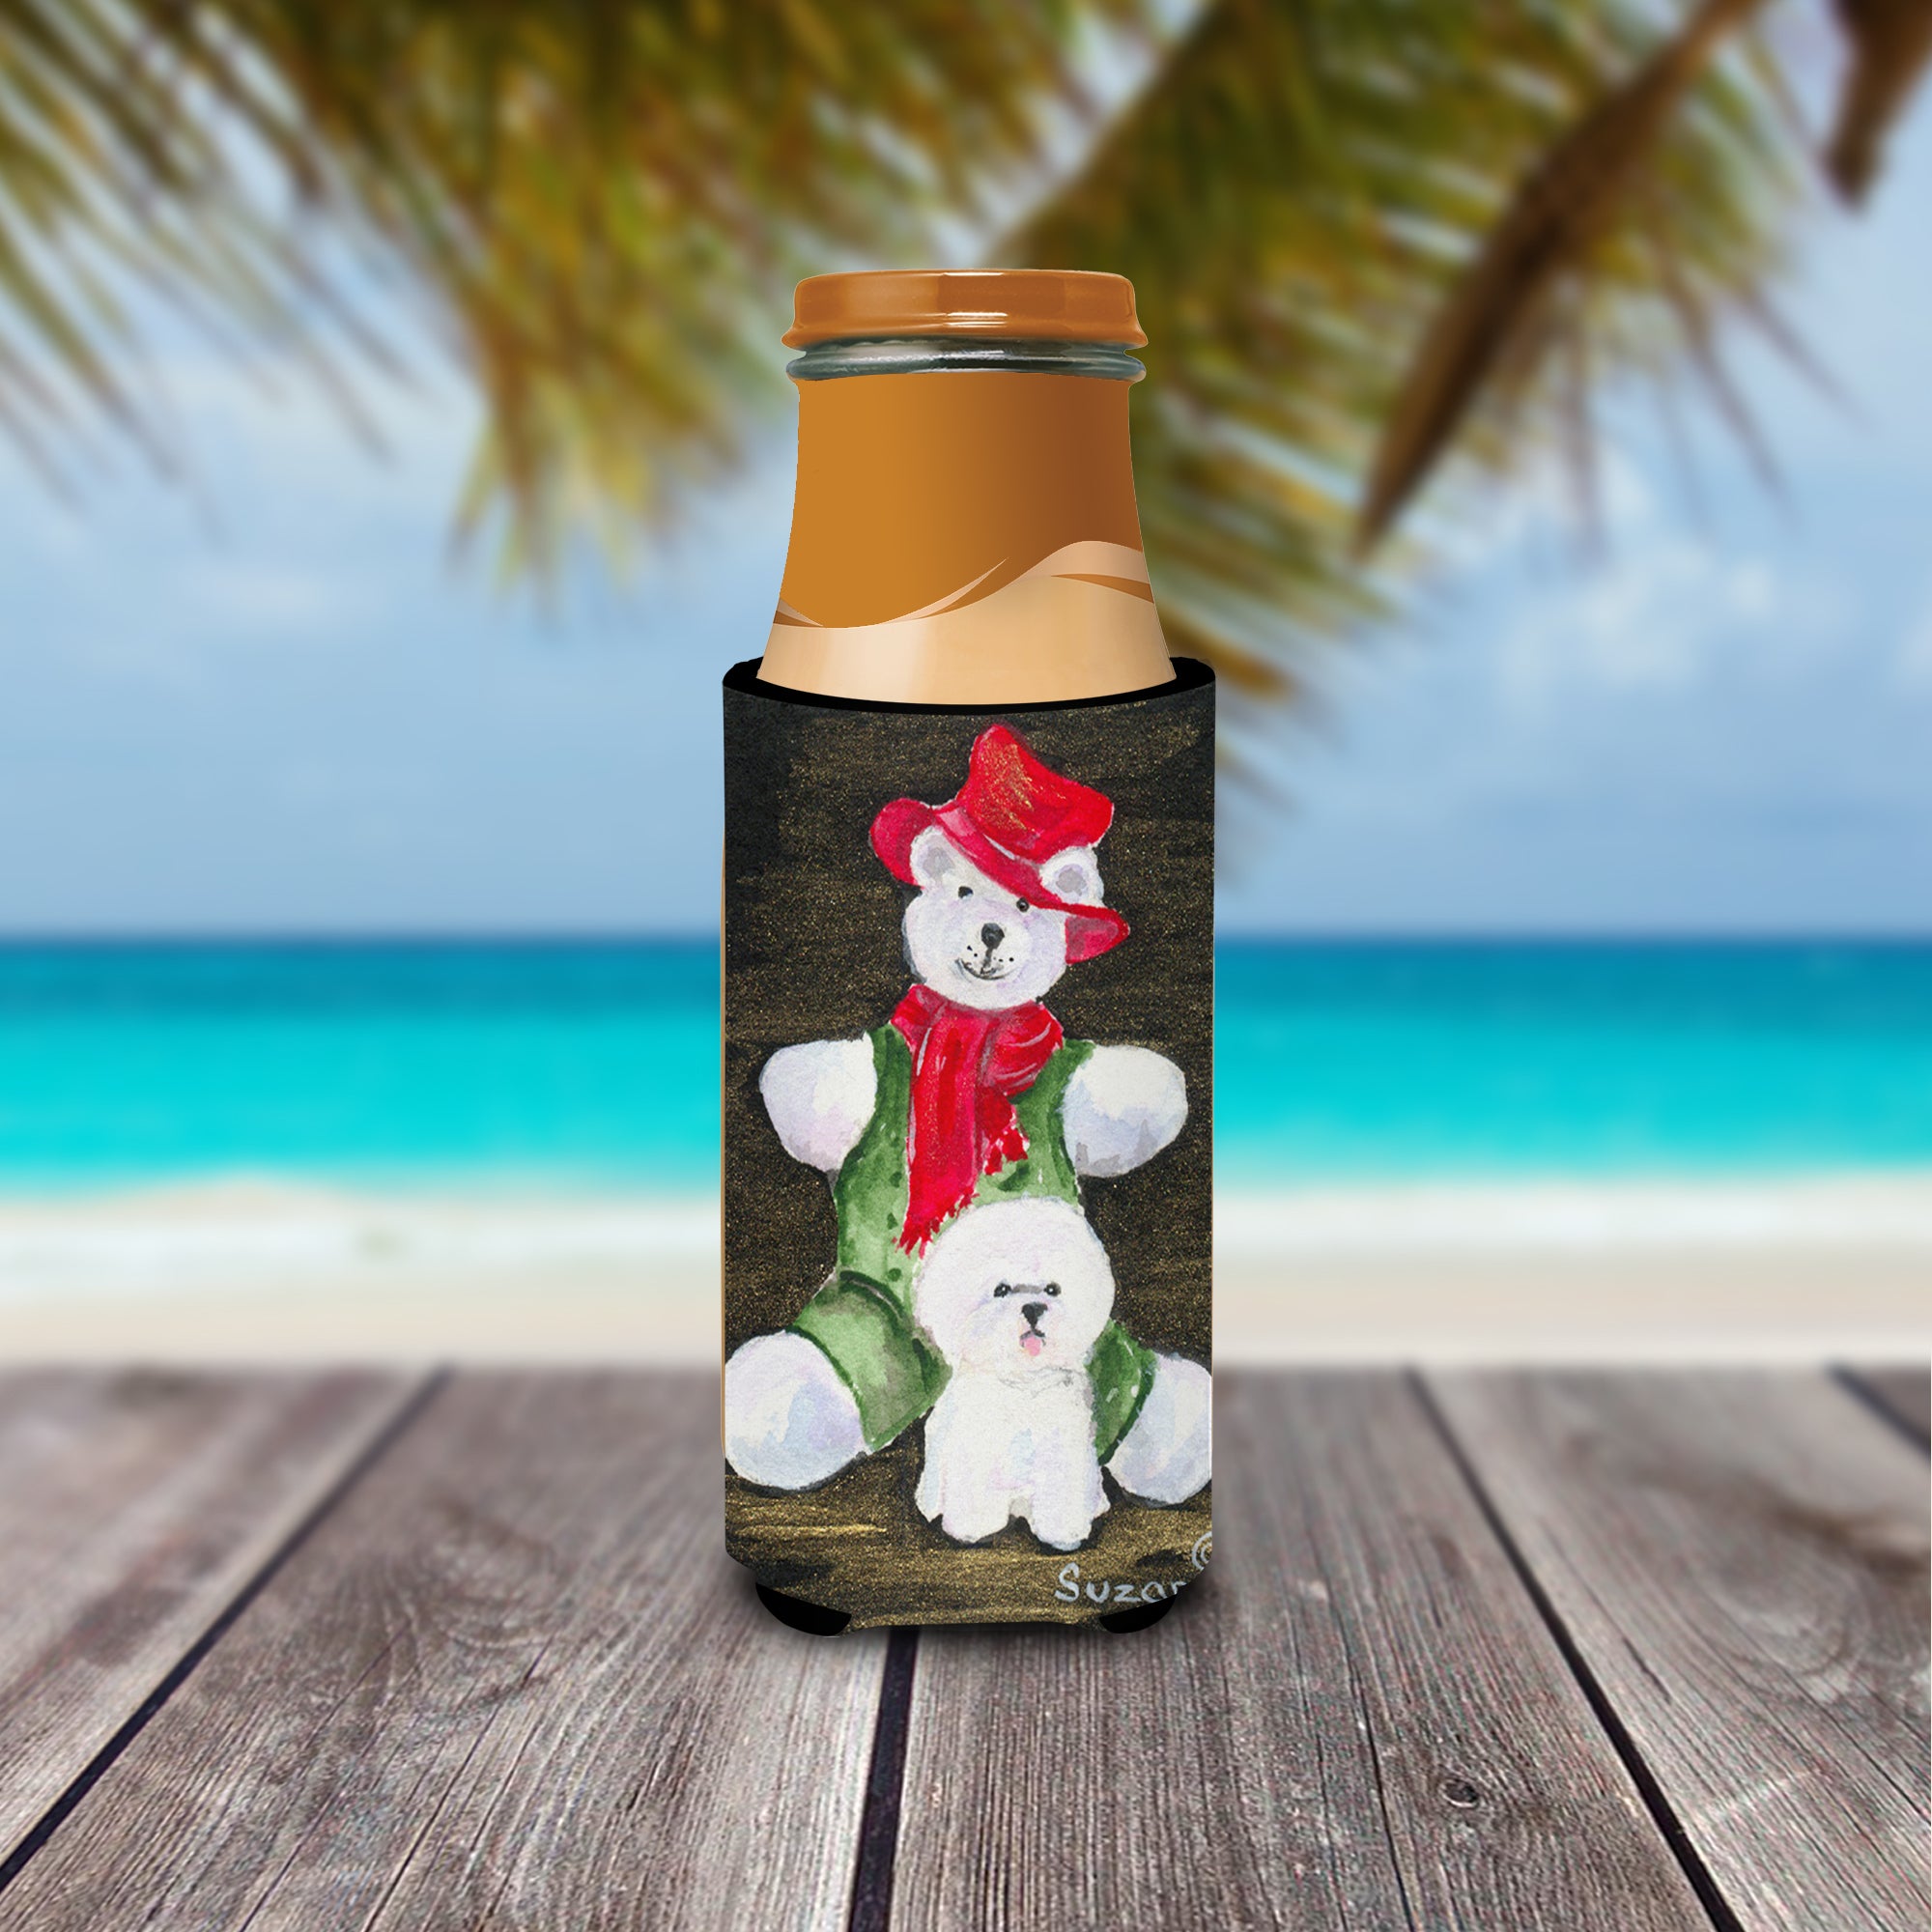 Bichon Frise with Teddy Bear Ultra Beverage Insulators for slim cans SS8948MUK.